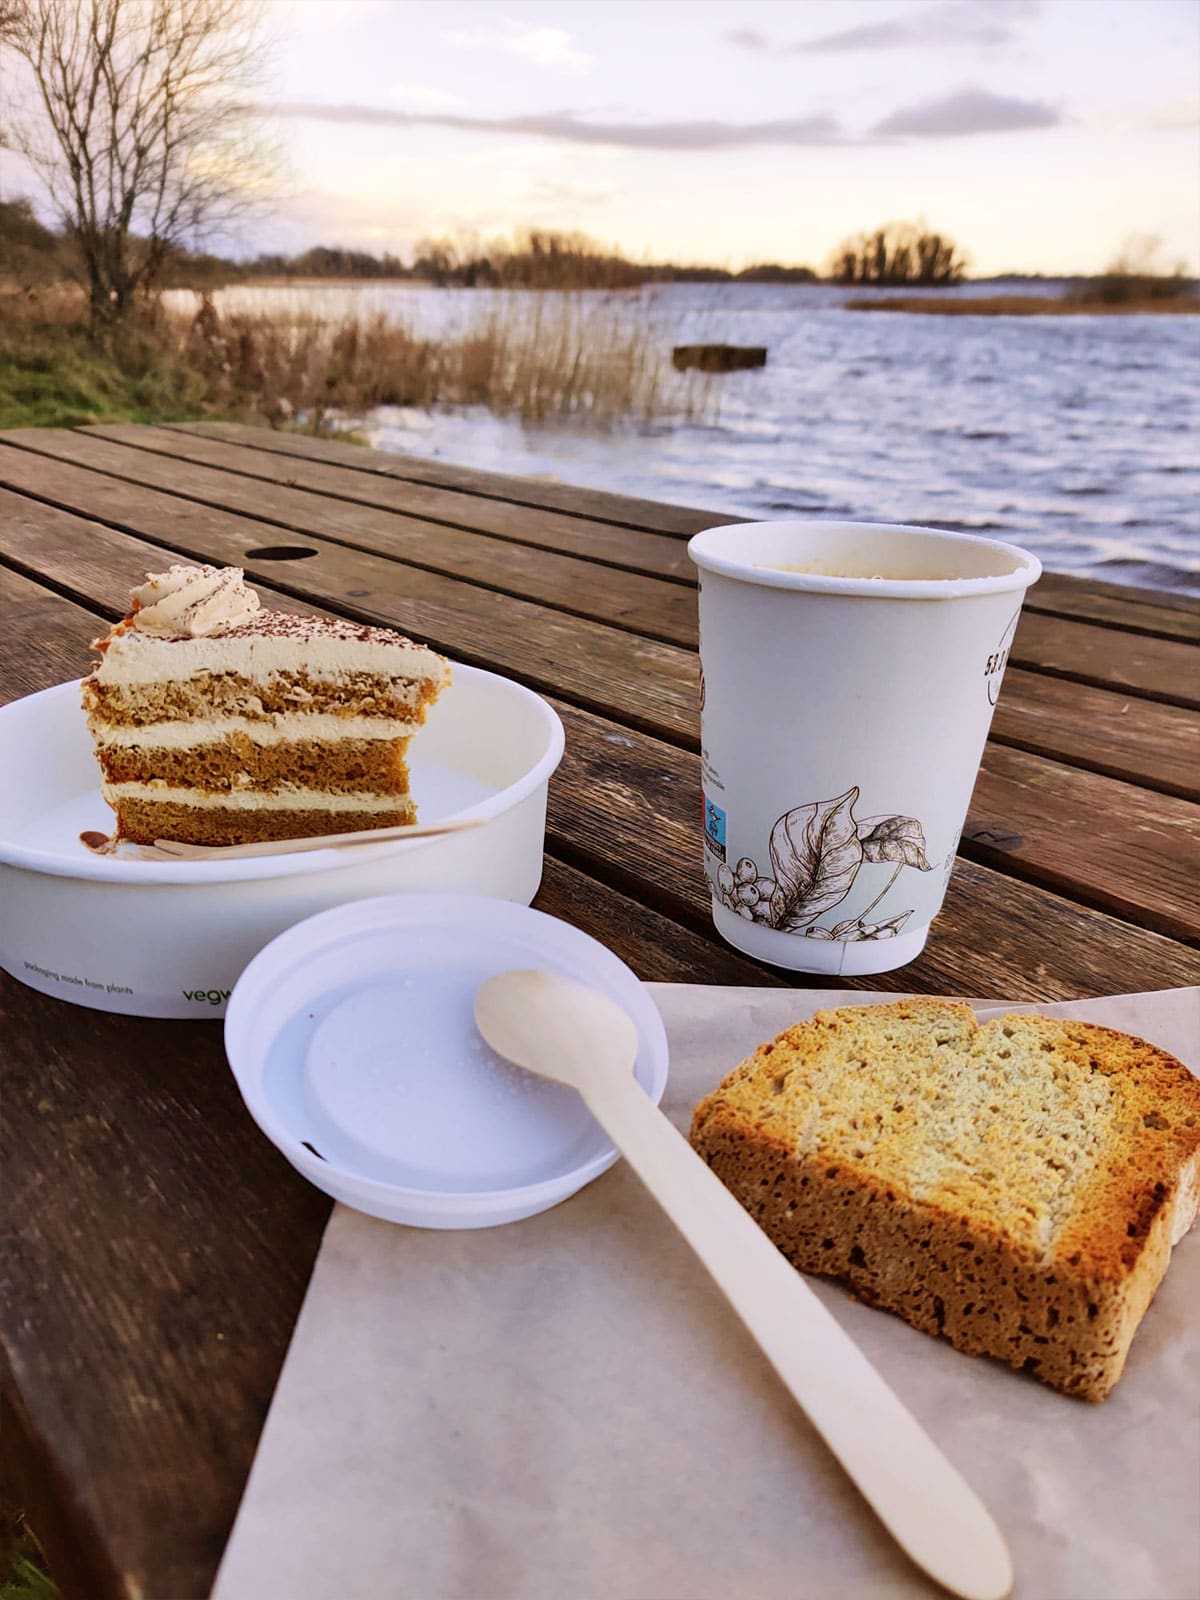 Coffee and cake by the lakeside